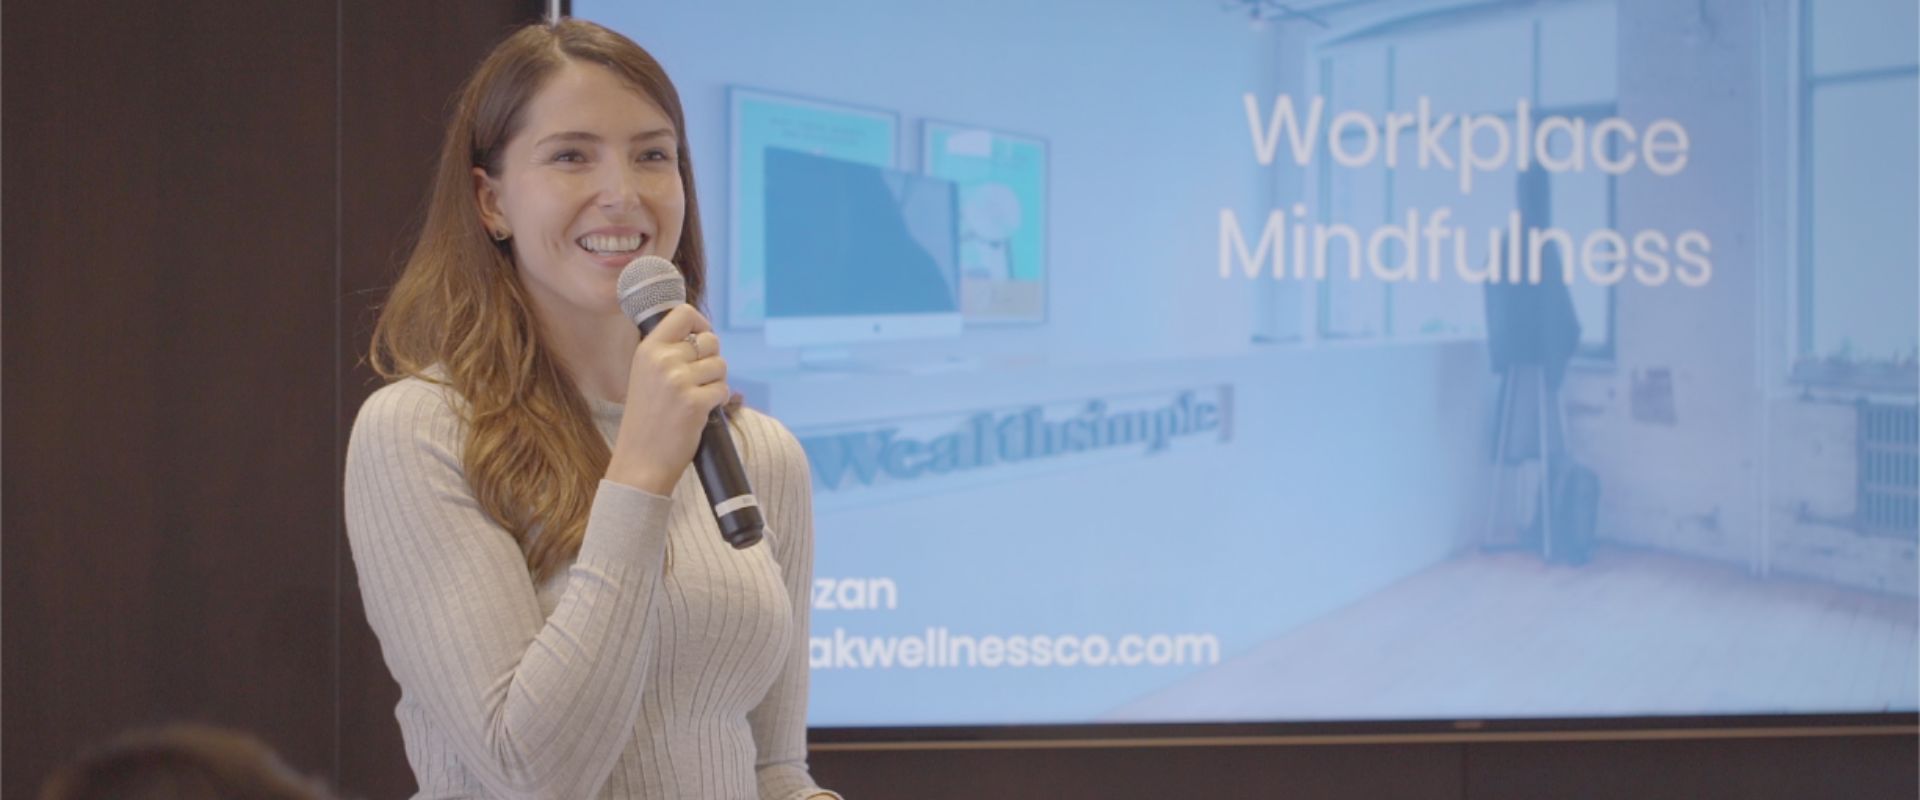 Twello CEO, Kayla Baum, holding a mic with a workplace mindfulness presentation slide behind her.